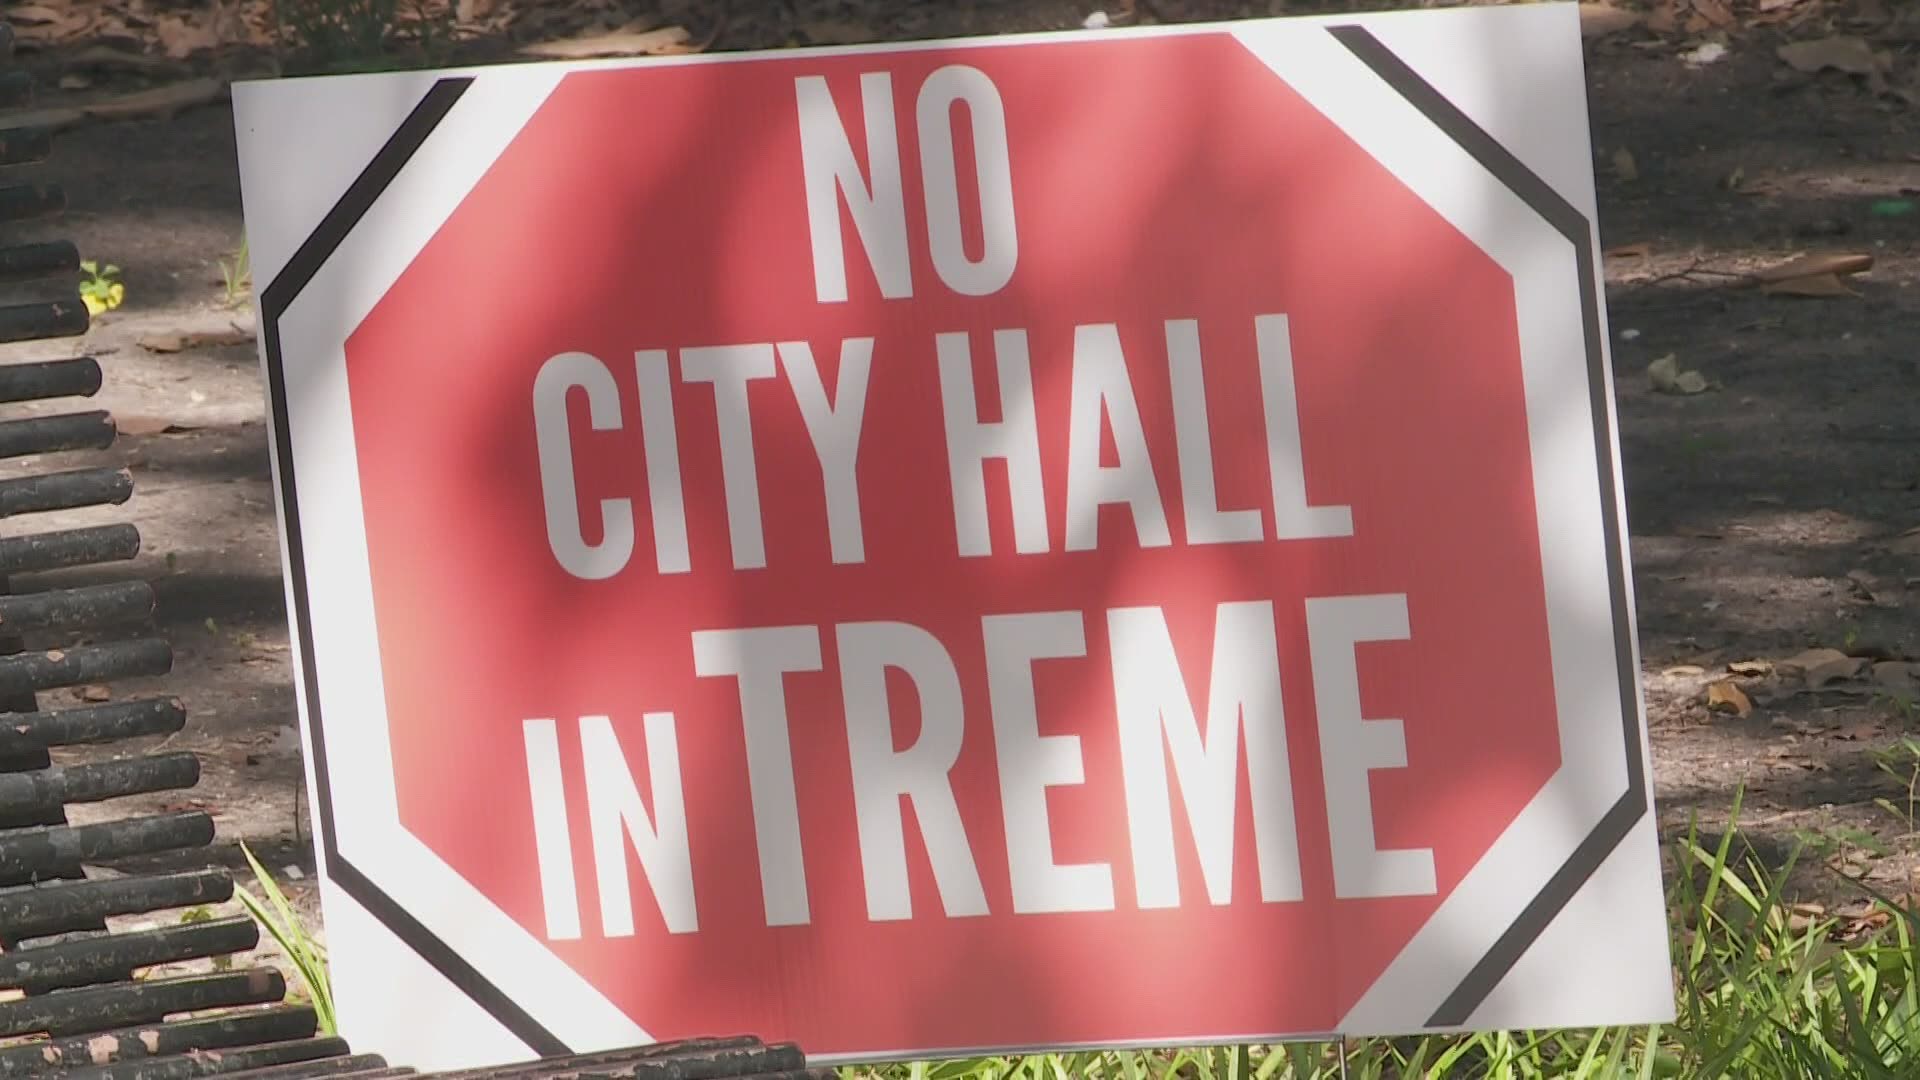 After several protests in the city, Mayor Cantrell said she will no longer move city hall to the Municipal Auditorium.